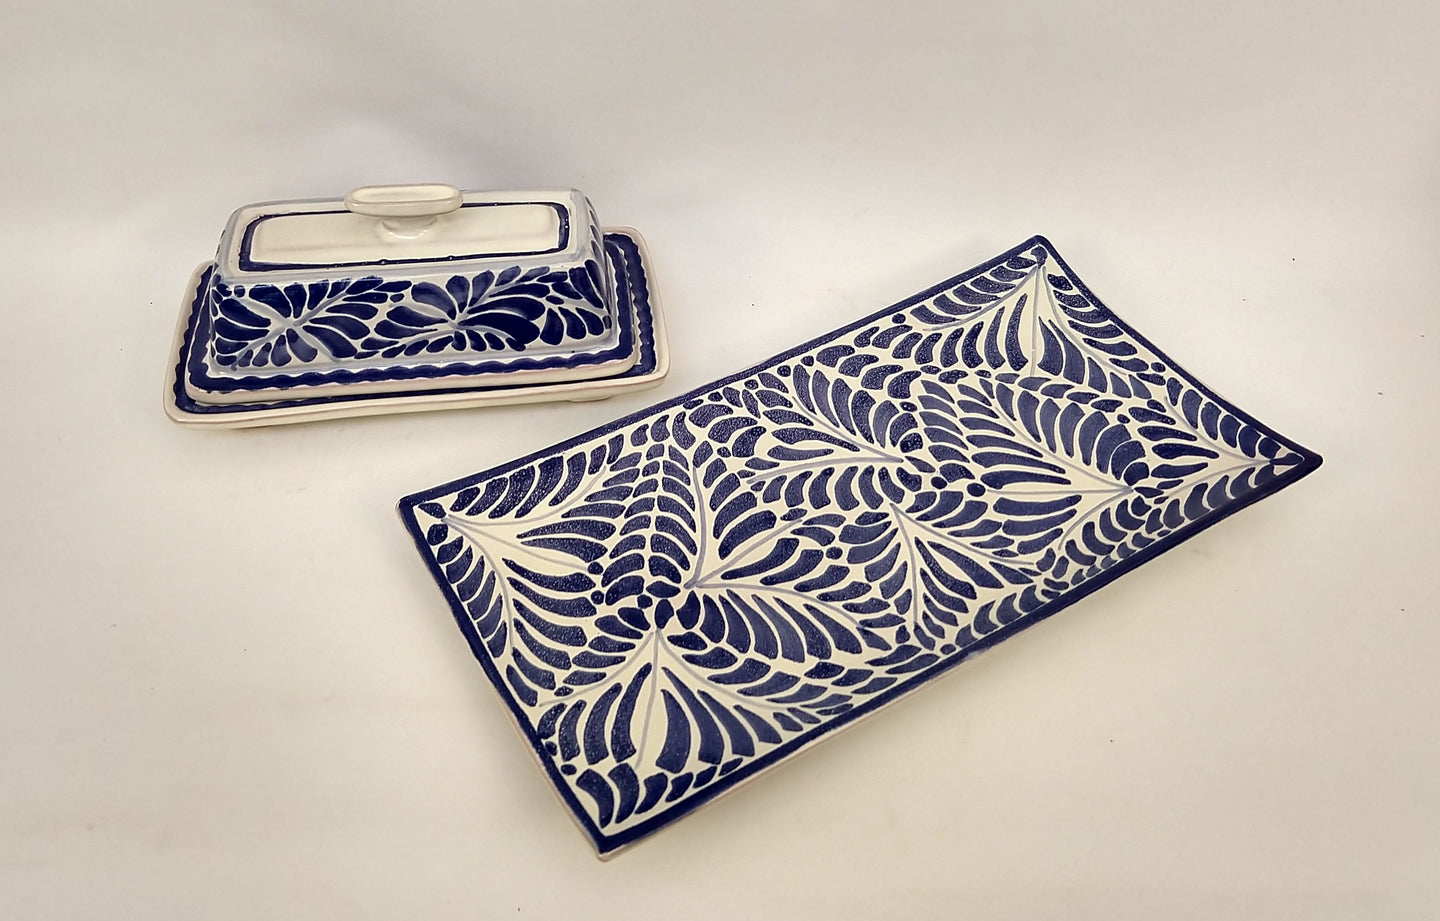 Buther Dish & Small Tray Set of 2 Milestones Blue and White - Mexican Pottery by Gorky Gonzalez